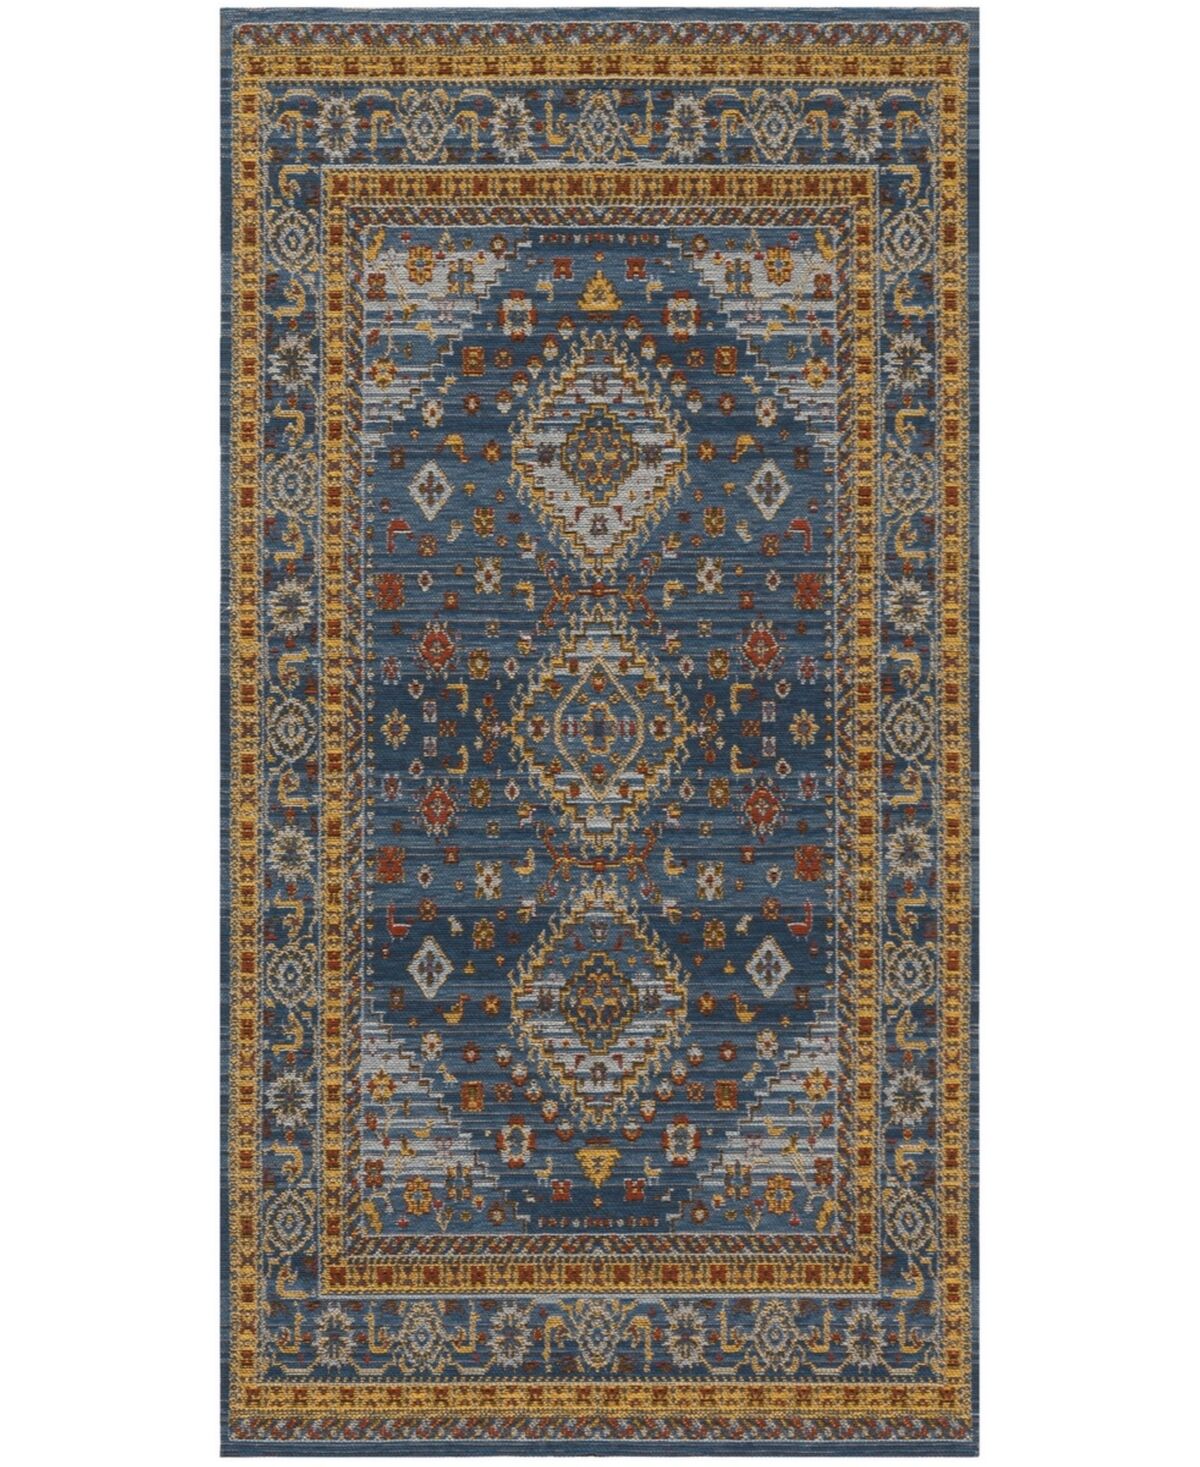 Safavieh Classic Vintage CLV114 Blue and Gold 8' x 10' Area Rug - Blue